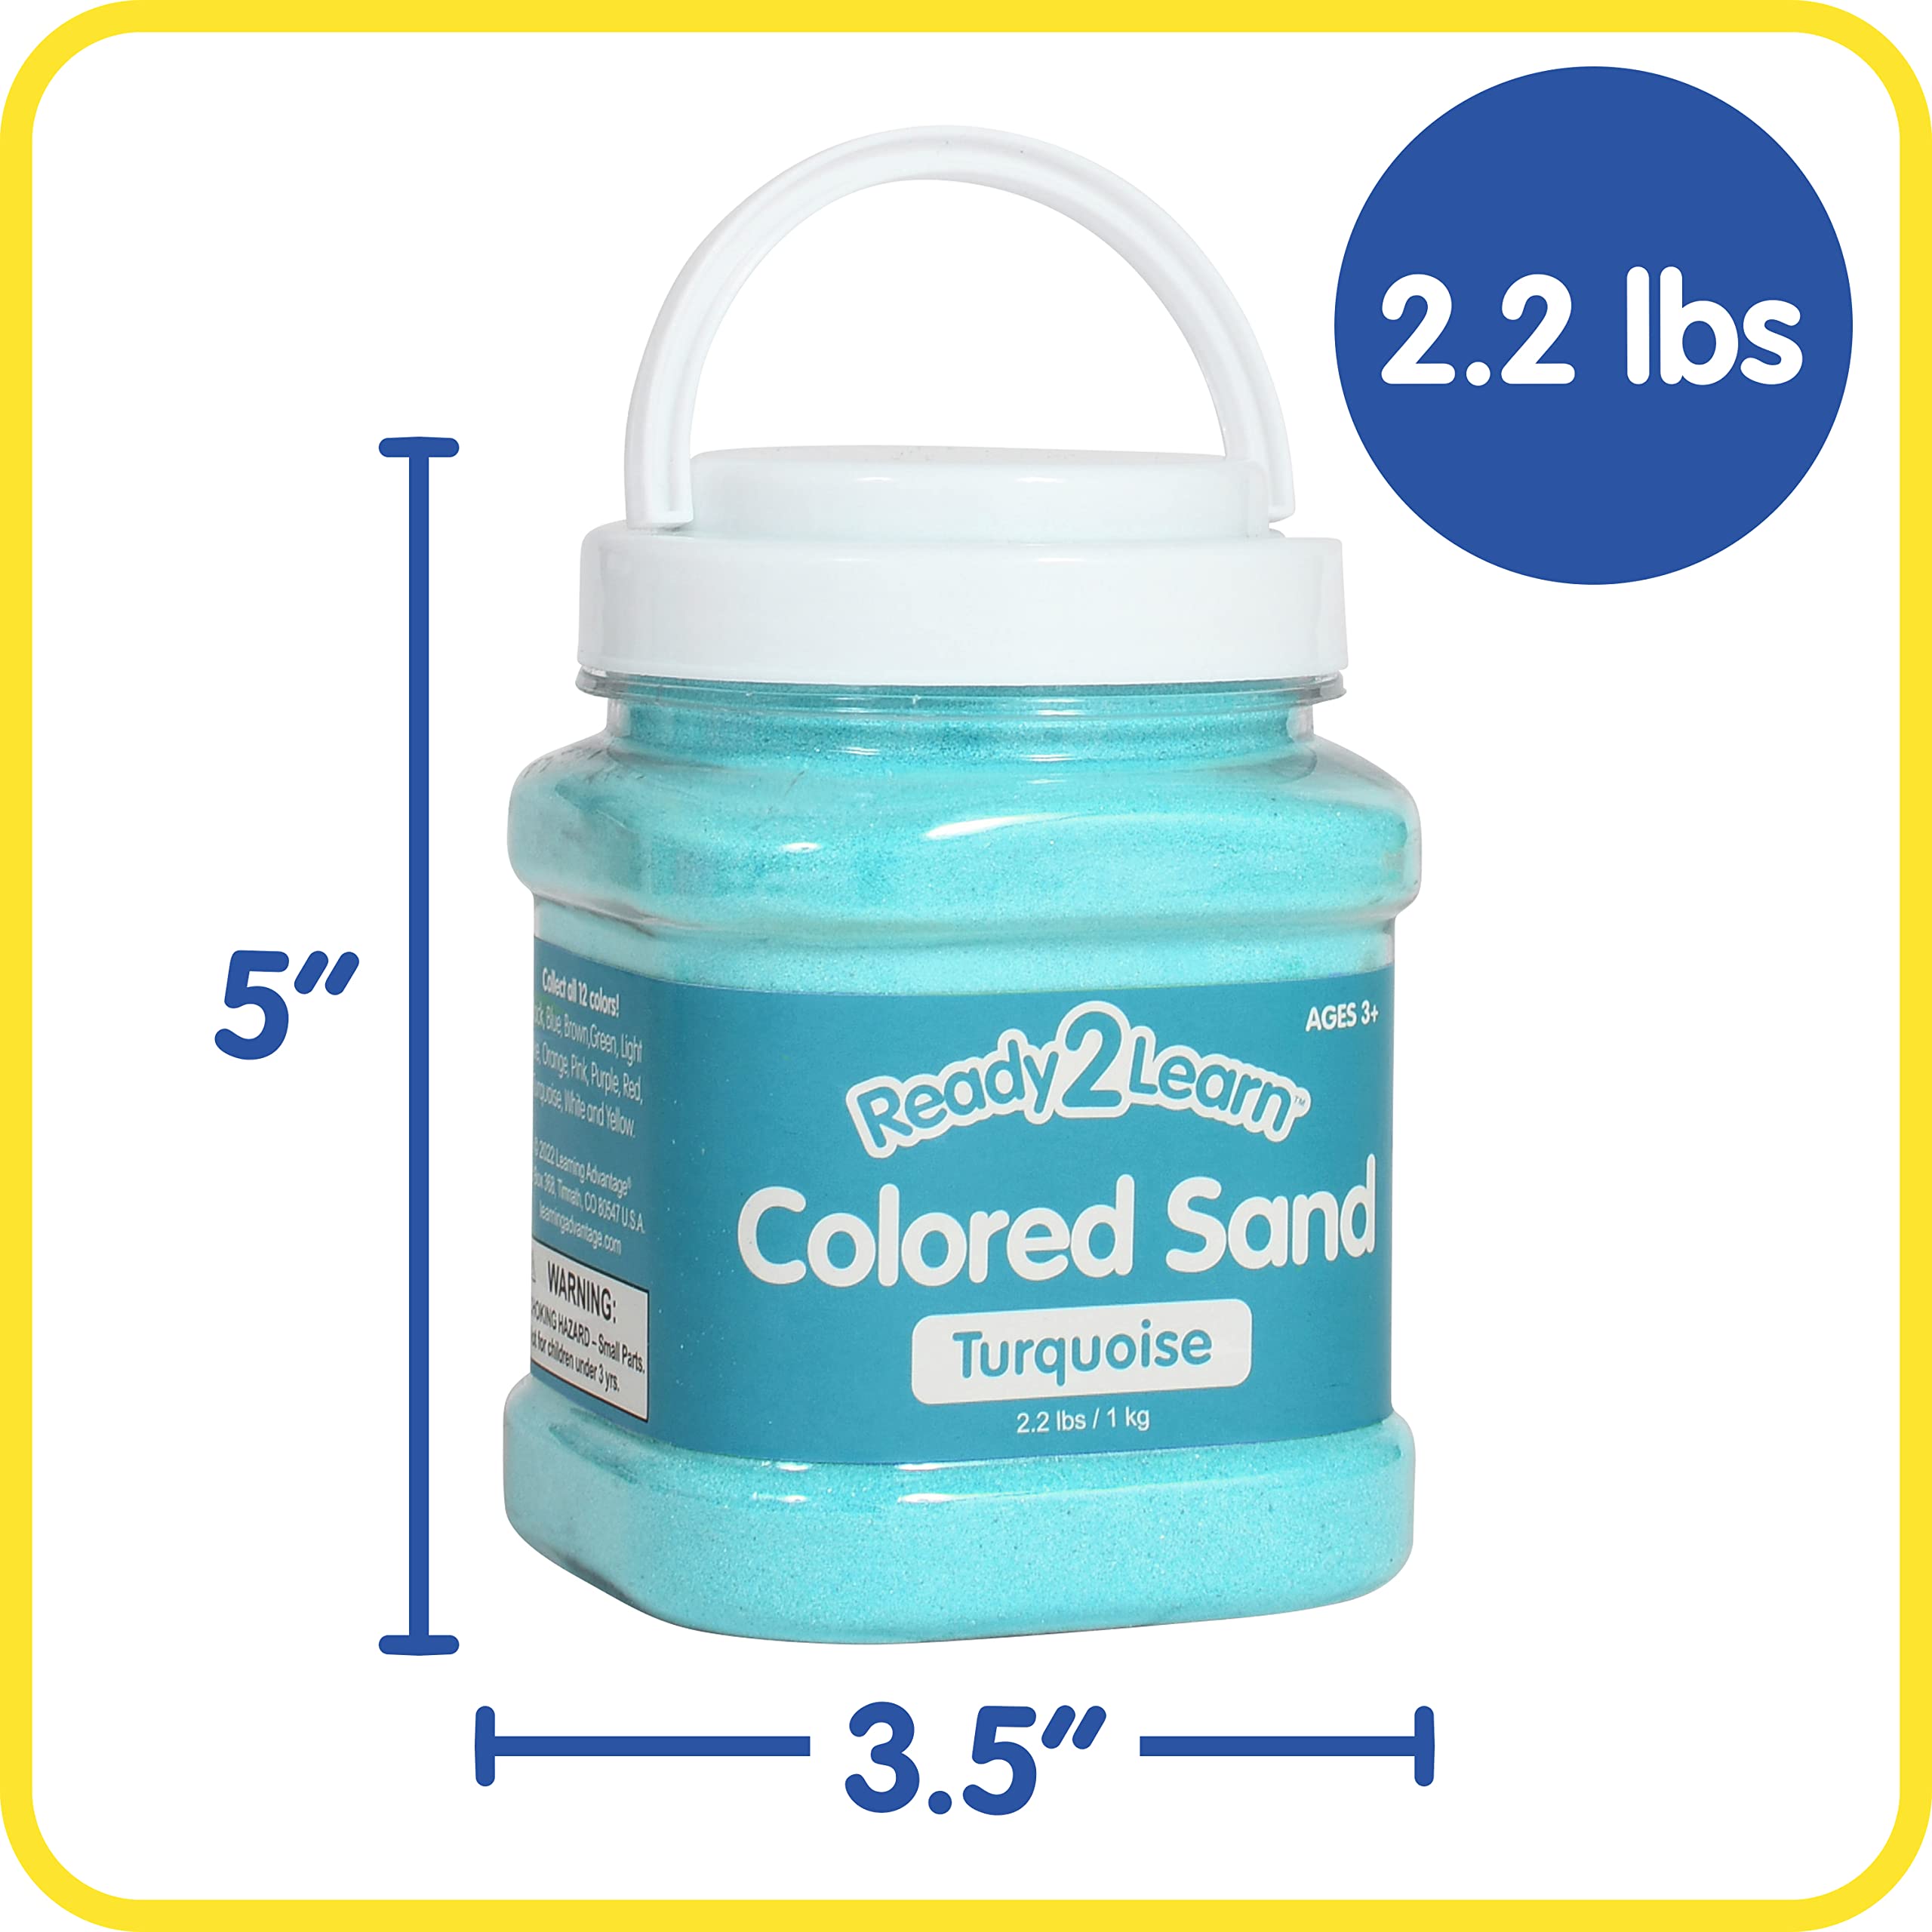 READY 2 LEARN Colored Sand - Turquoise - 2.2 lbs - Play Sand for Kids - Perfect for Arts and Crafts, Sensory Bins, Wedding Decorations and Vase Filler